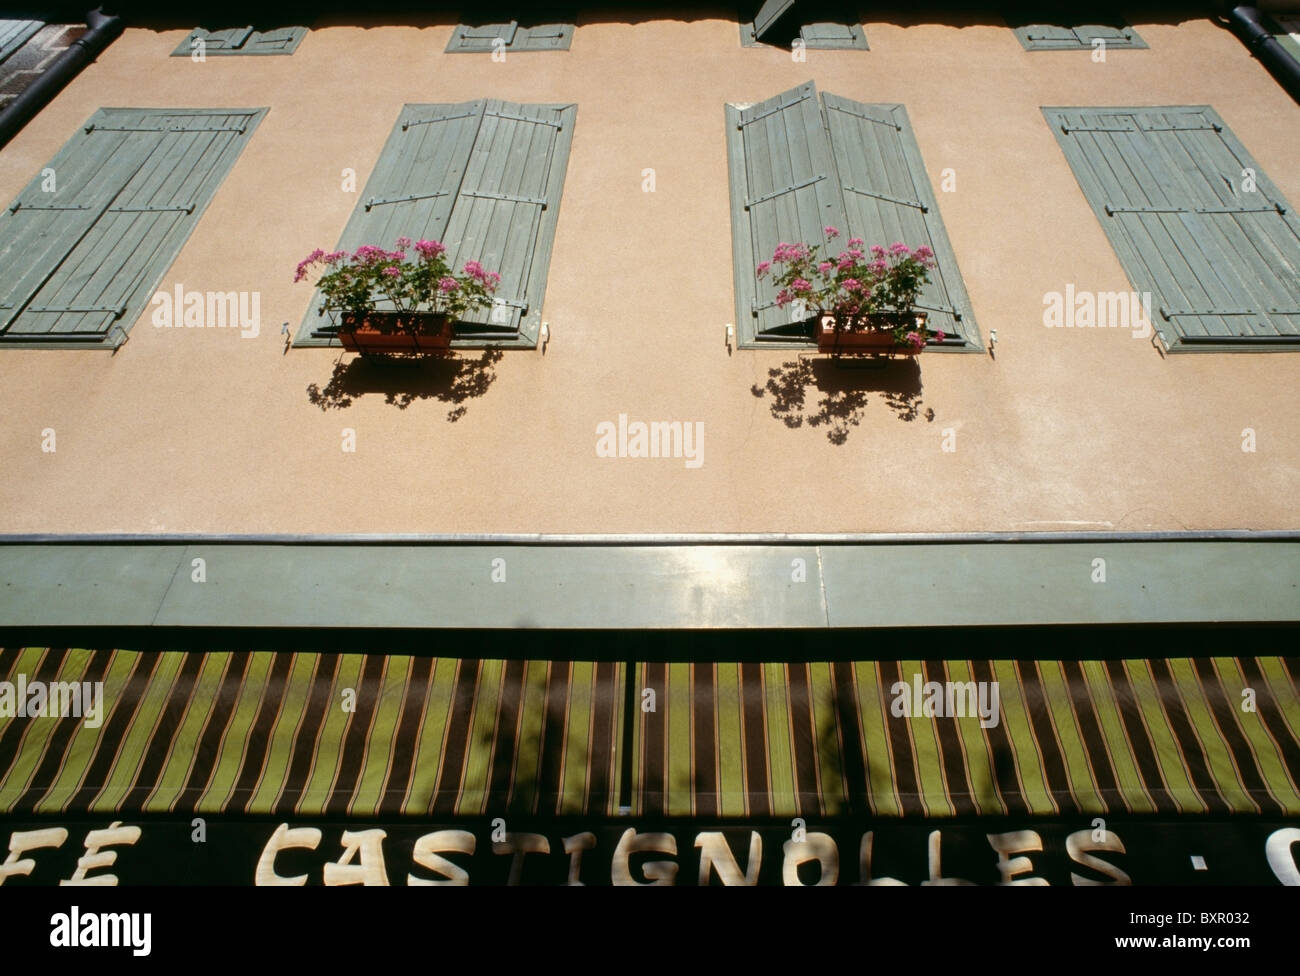 Building With Shutters, Flower Boxes And Awning, Close-Up Stock Photo